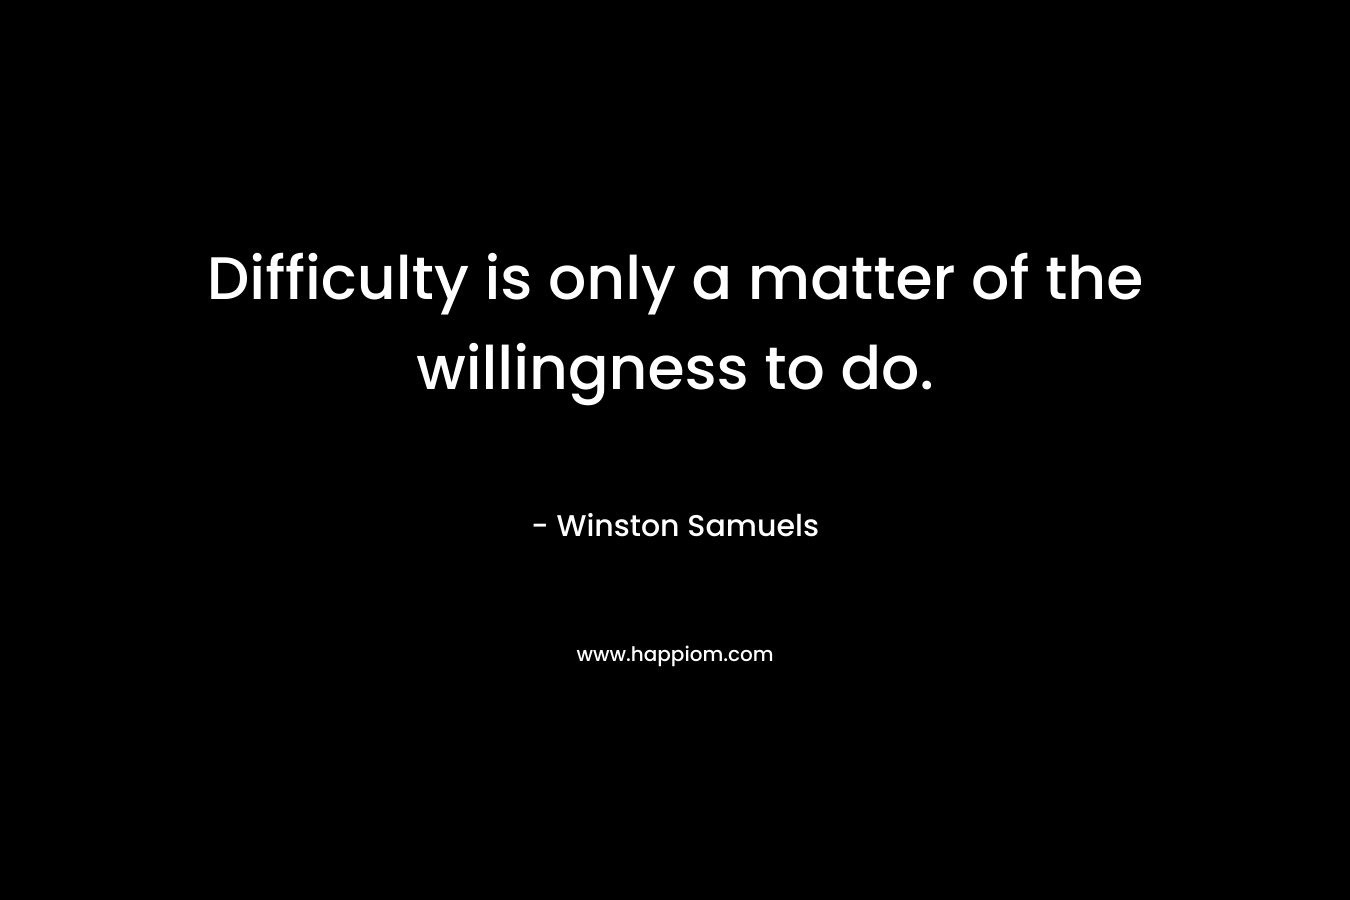 Difficulty is only a matter of the willingness to do. – Winston Samuels